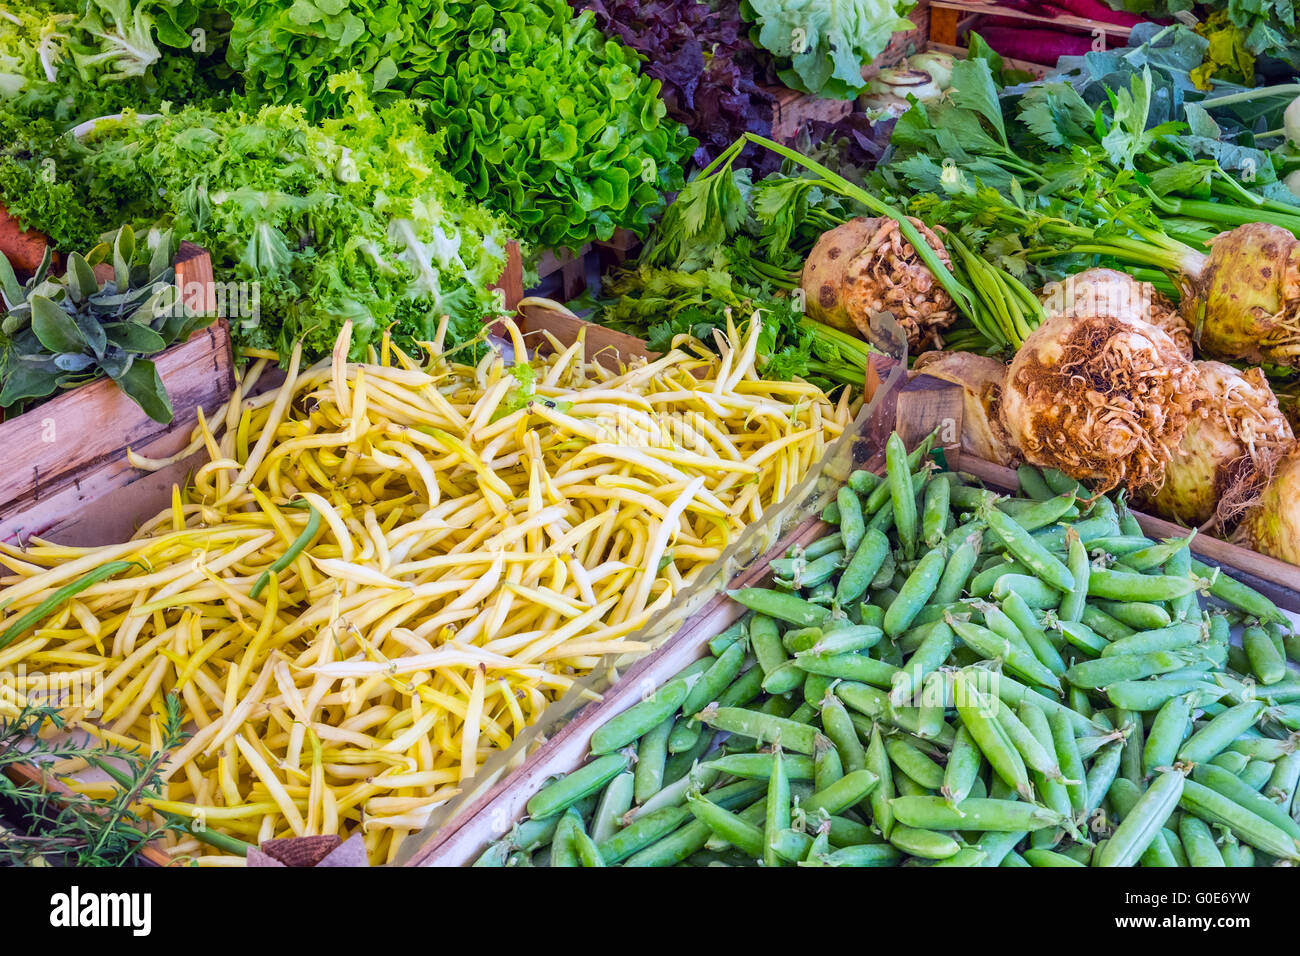 Vegetables and salad for sale at a market Stock Photo